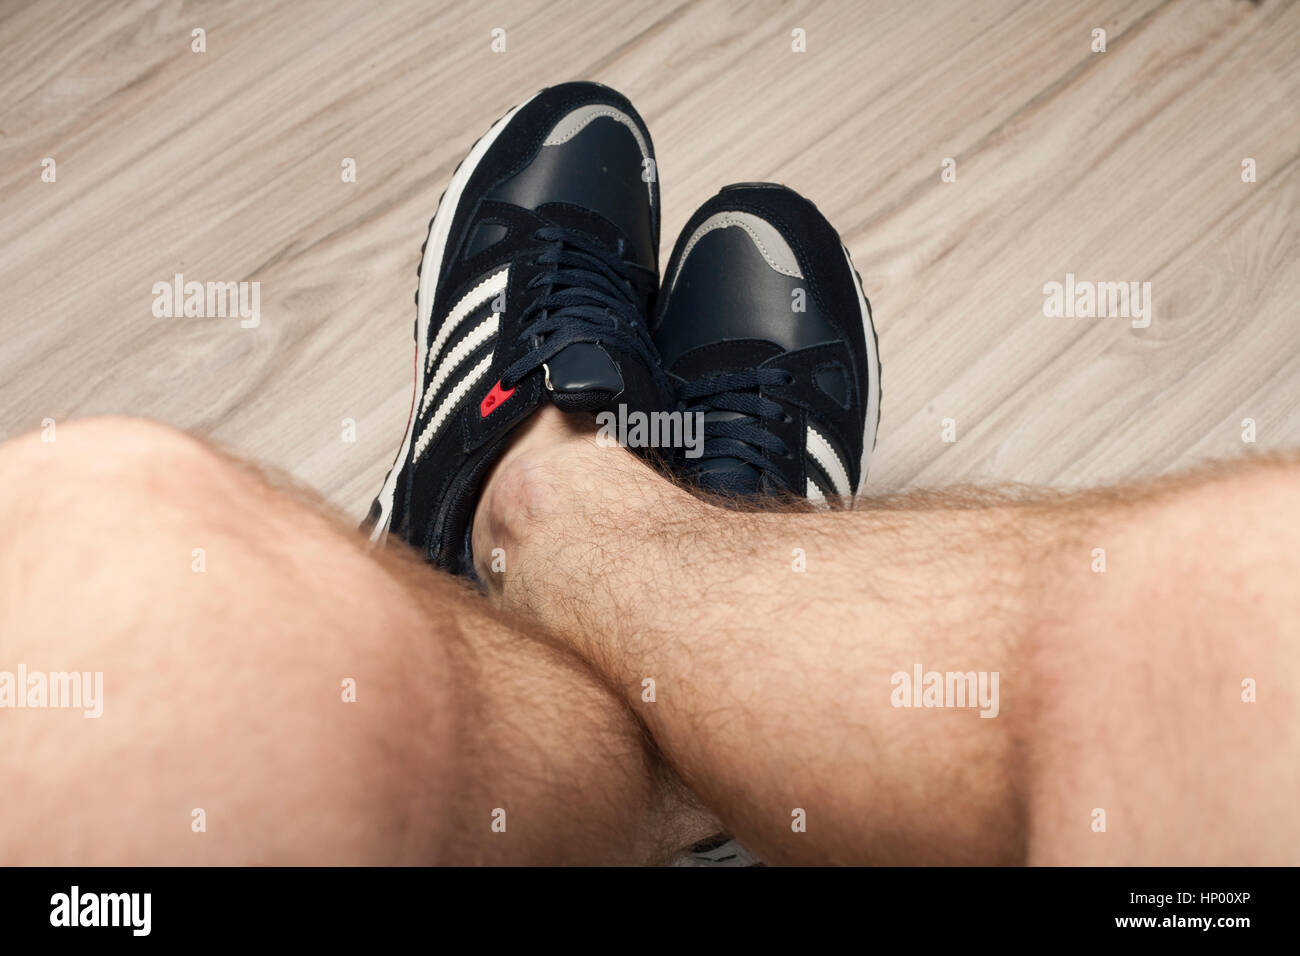 Man's hairy legs in sport shoes Stock Photo - Alamy